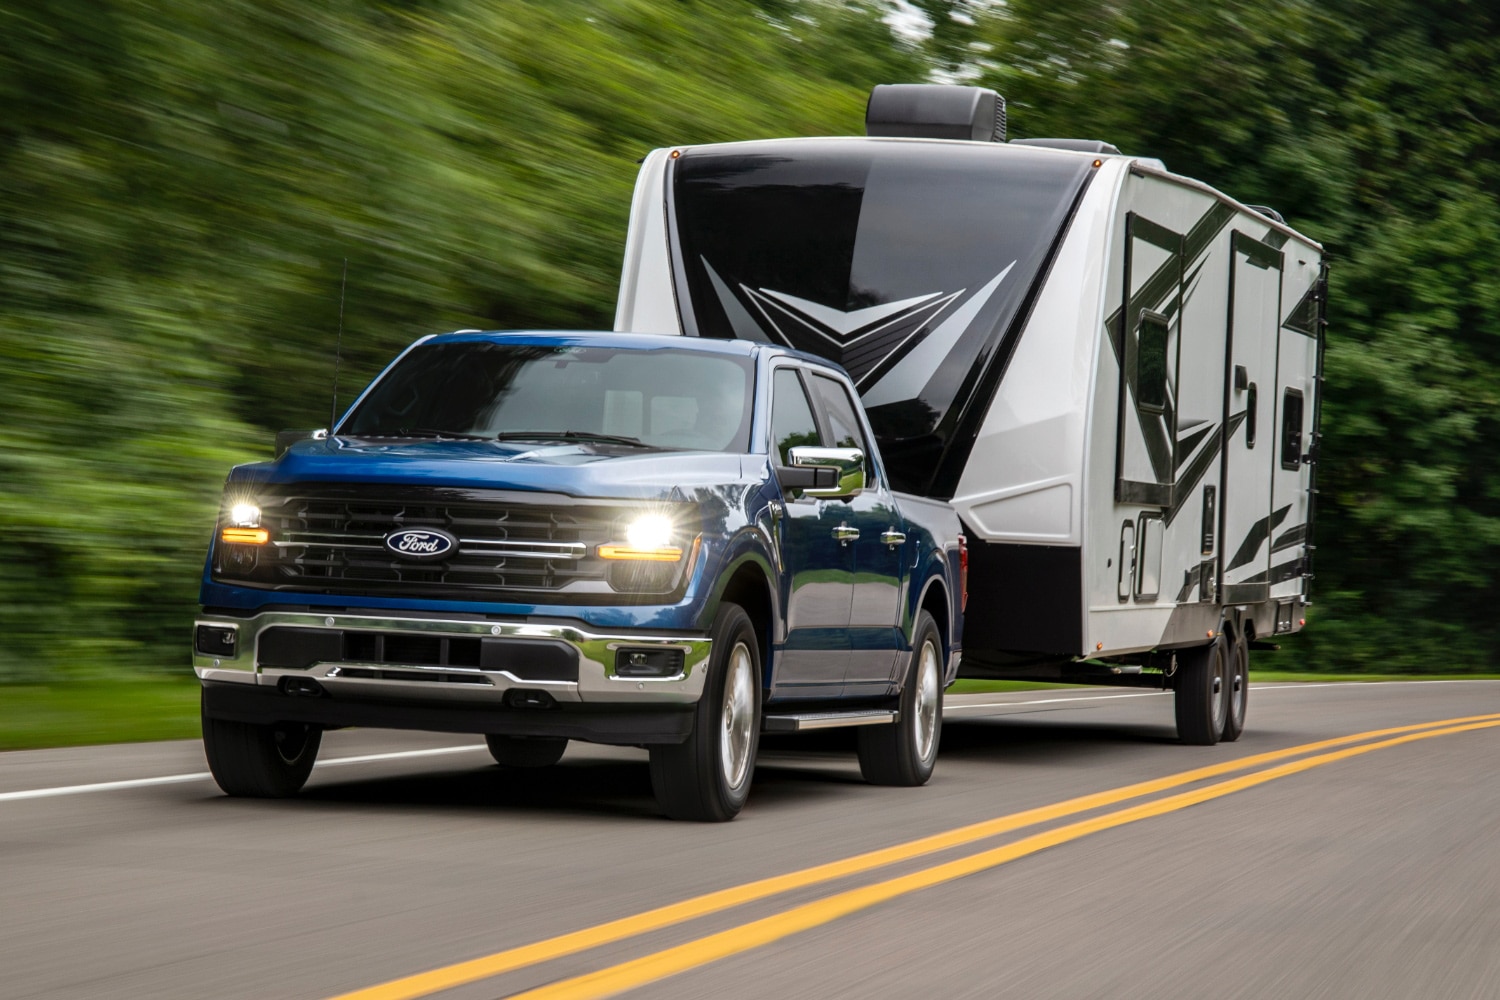 2024 Ford F-150 XLT in blue towing a travel trailer on two-lane road.